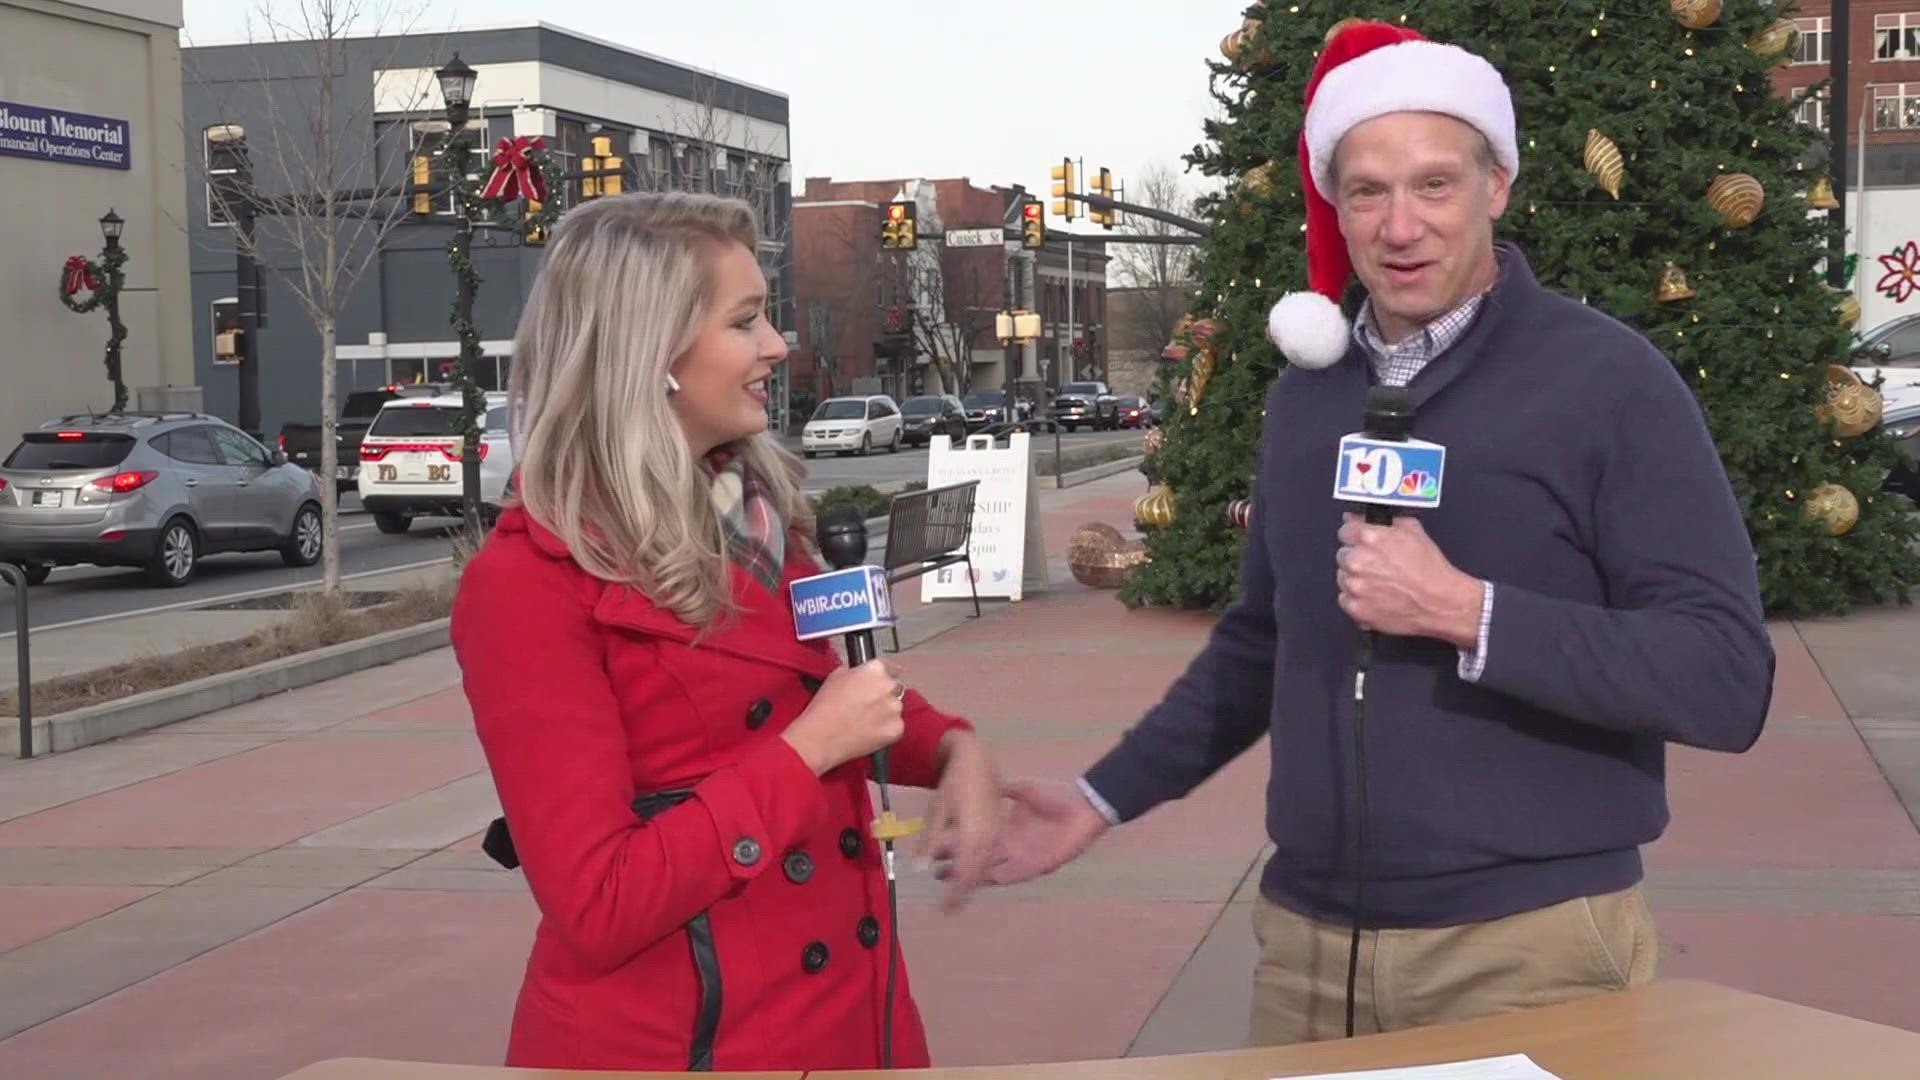 Maryville's mayor, Andy White, gives us an insight into how the holidays are so special for the city.